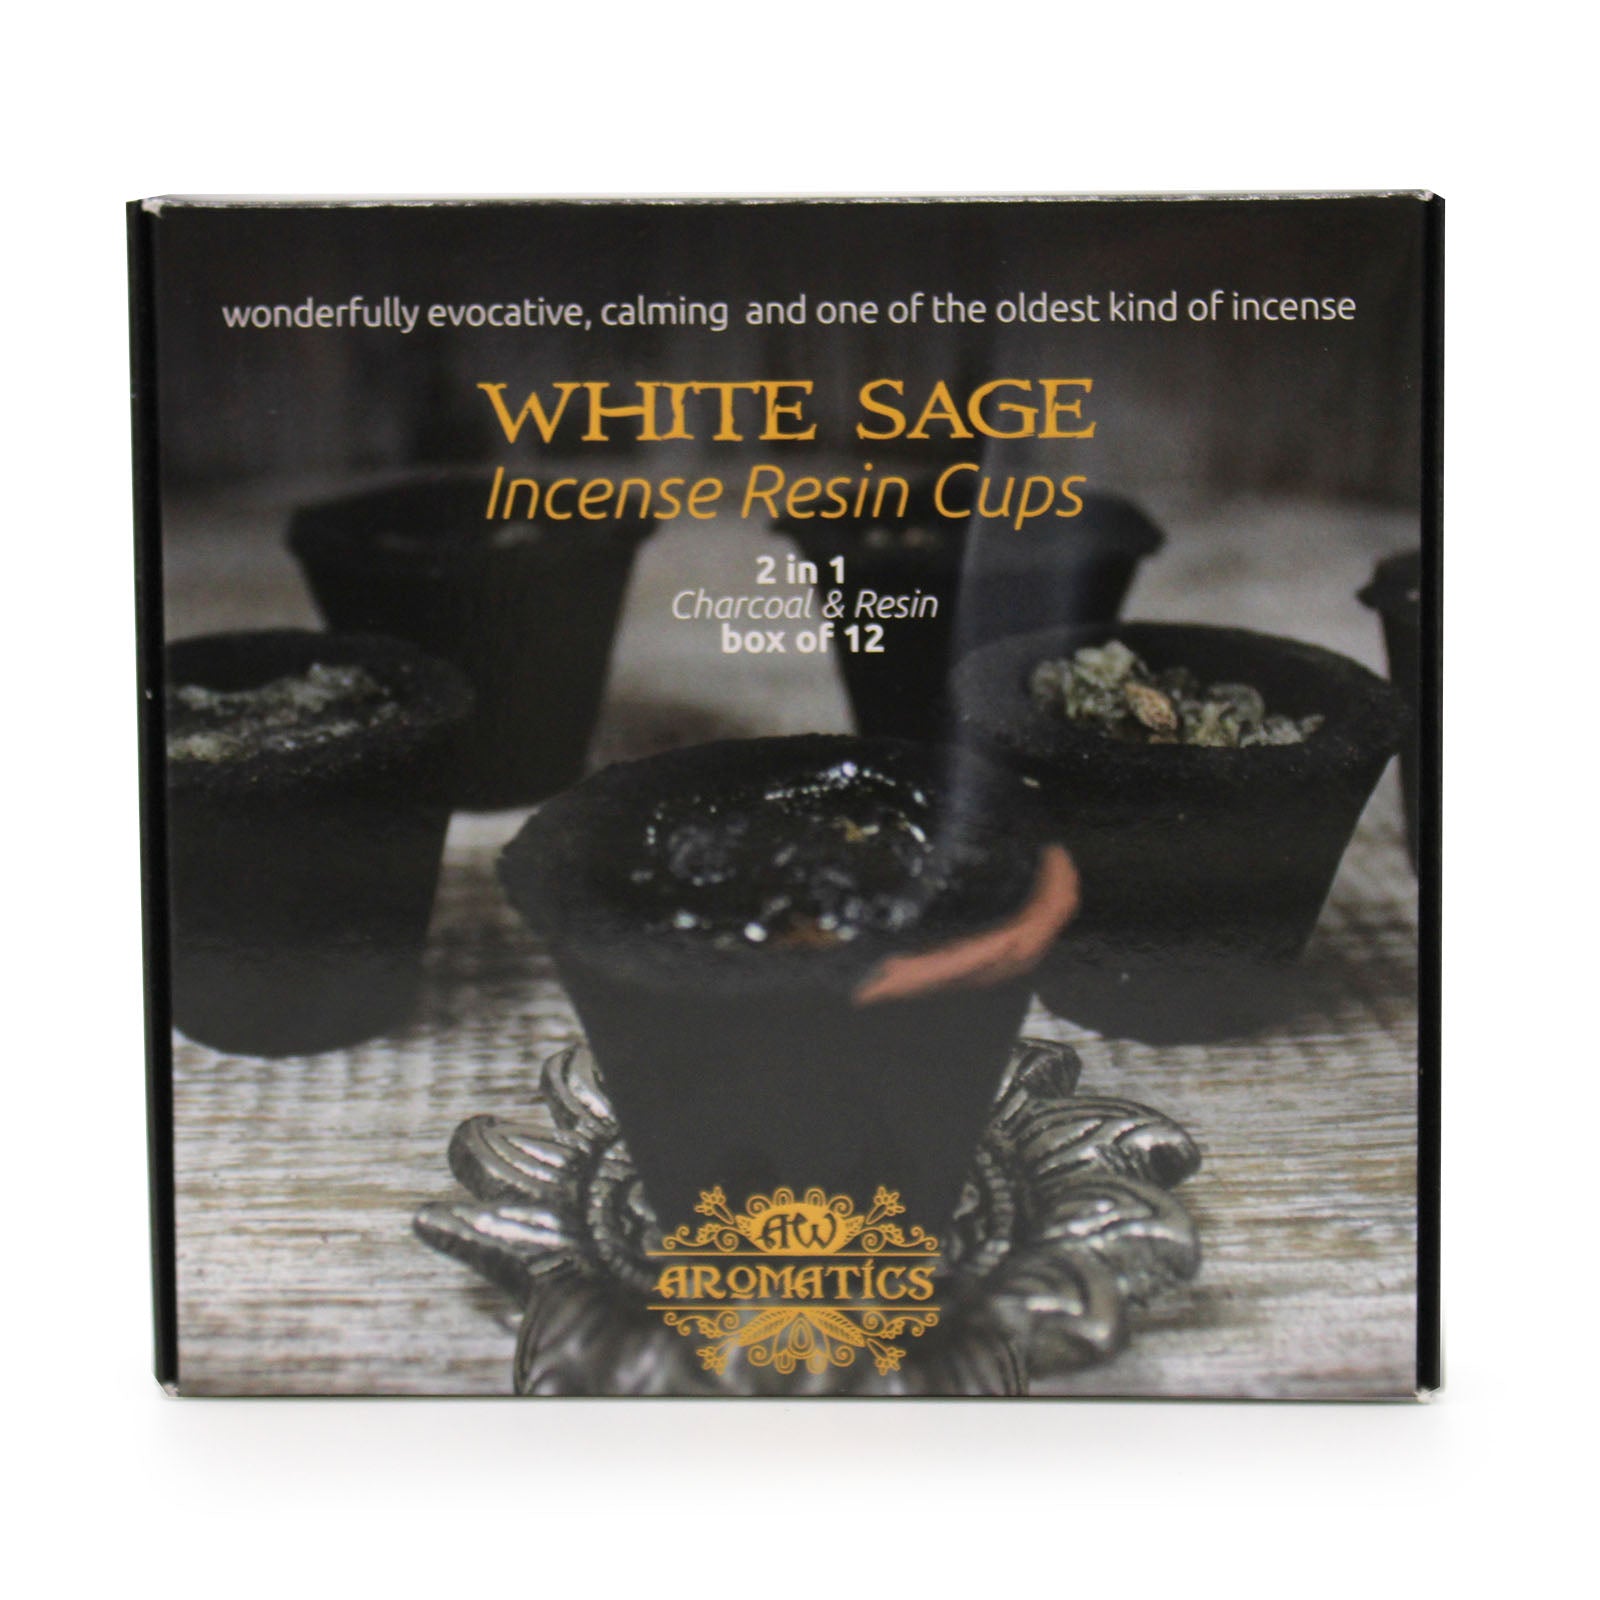 View Box of 12 Resin Cups White Sage information